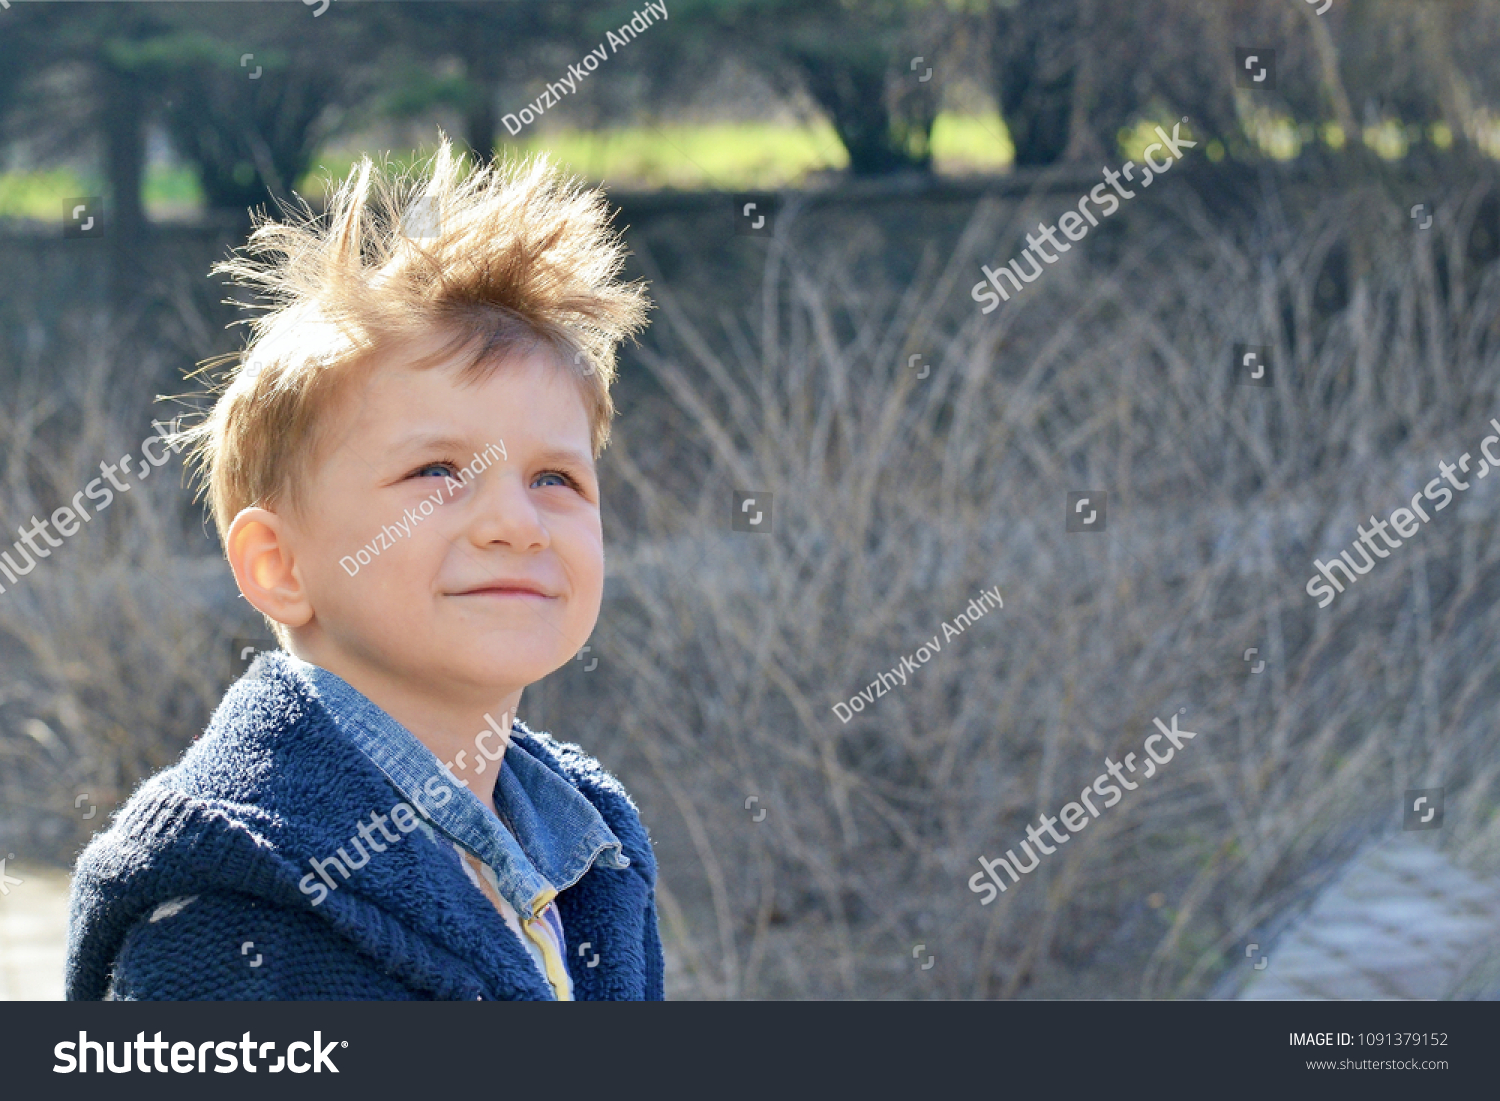 Portrait of a boy with an interesting facial expression outdoors outdoors, outdoors, child in the park. #1091379152